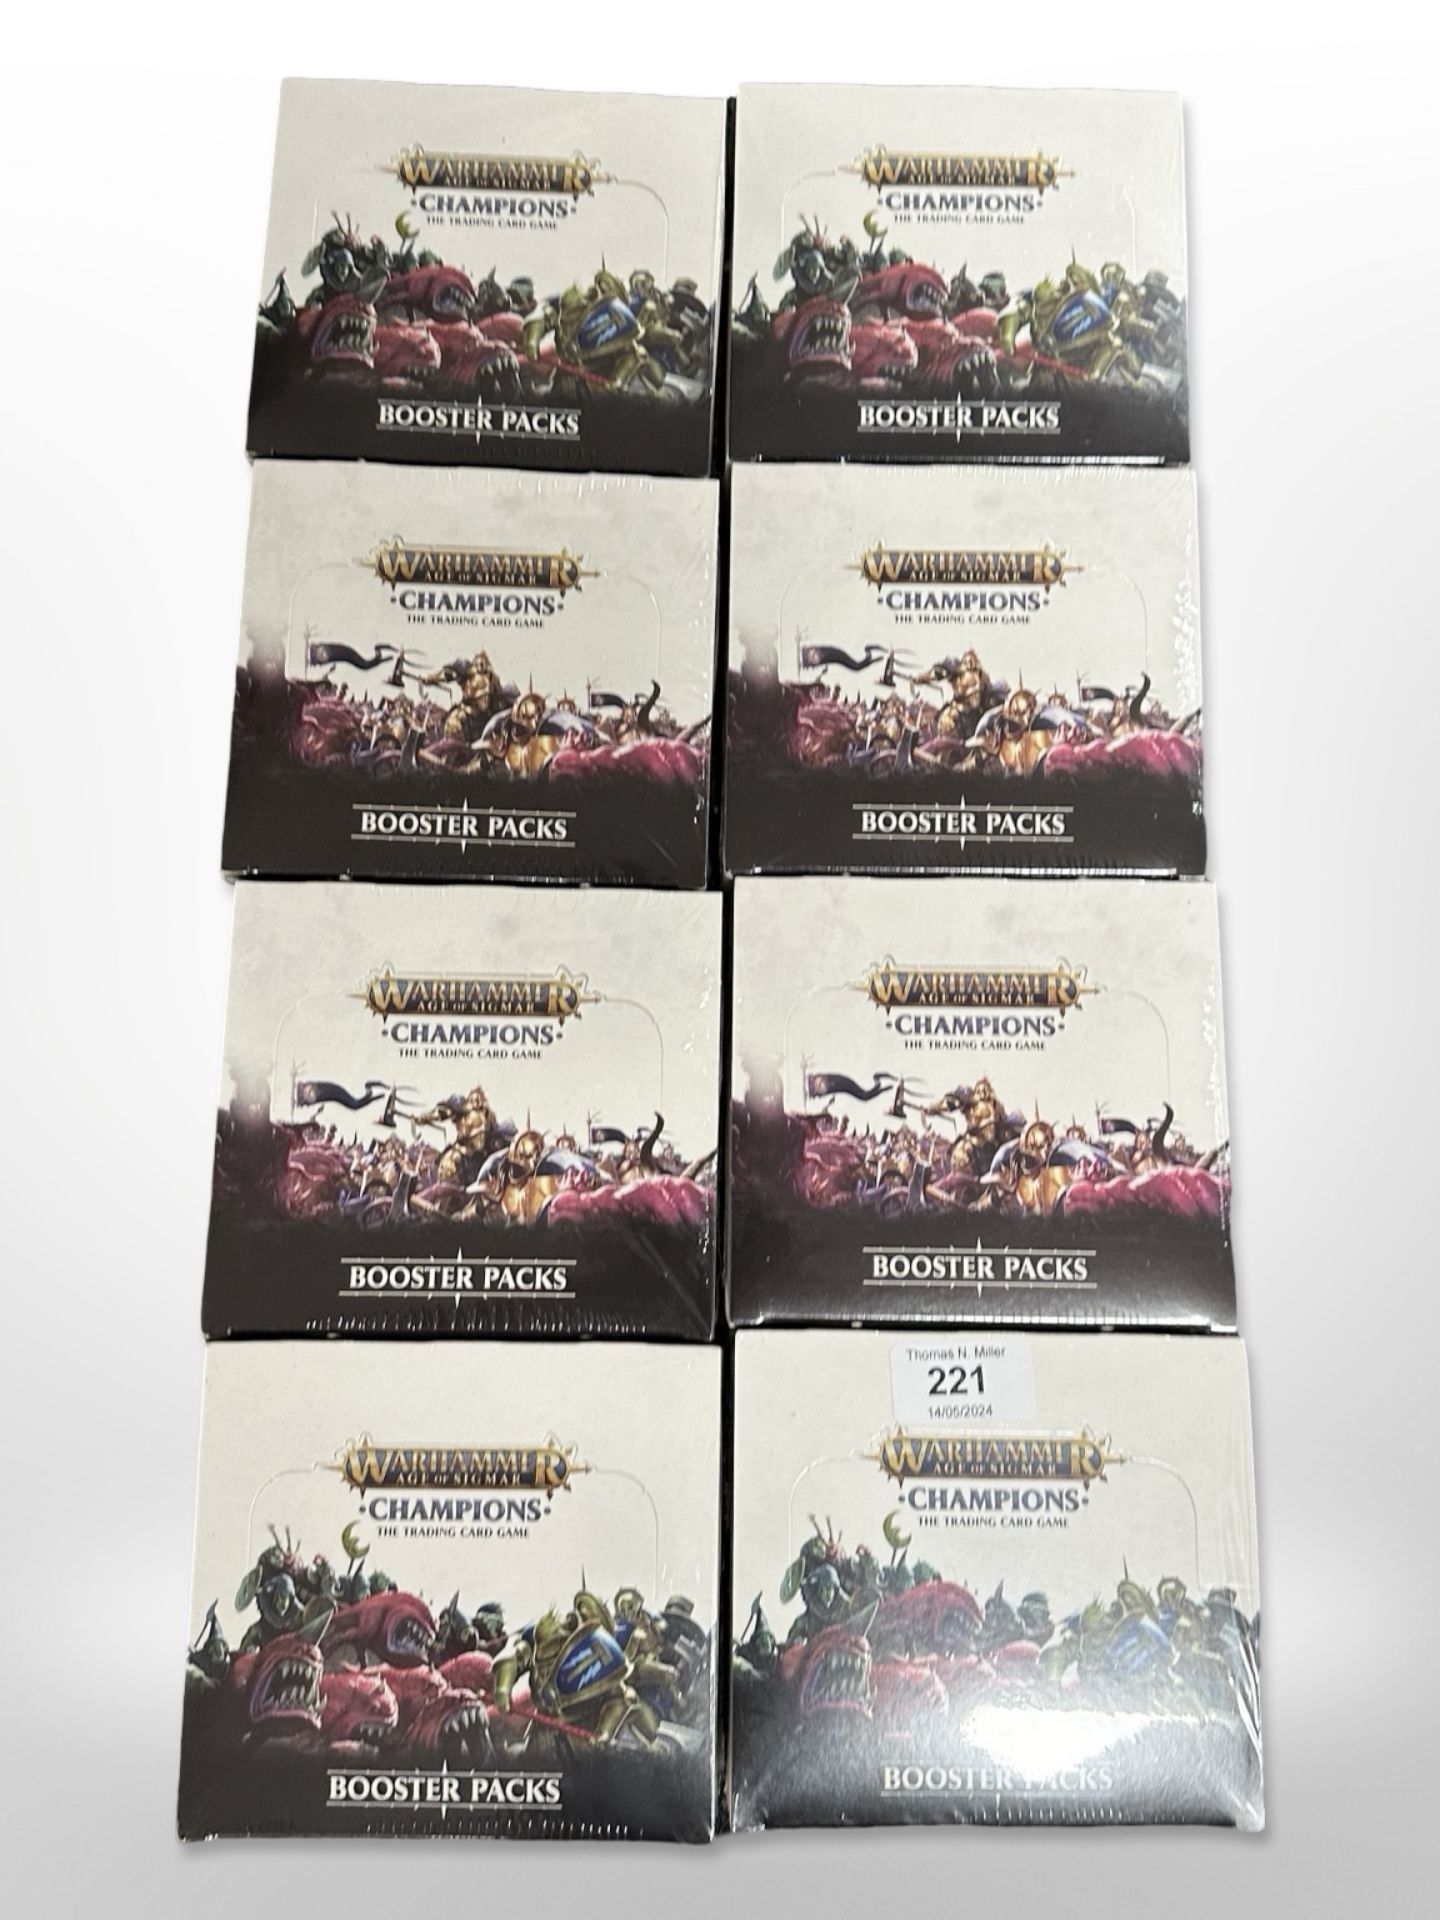 Eight Warhammer Age of Sigmar Champions Trading Card Game booster sets, all sealed in cellophane.